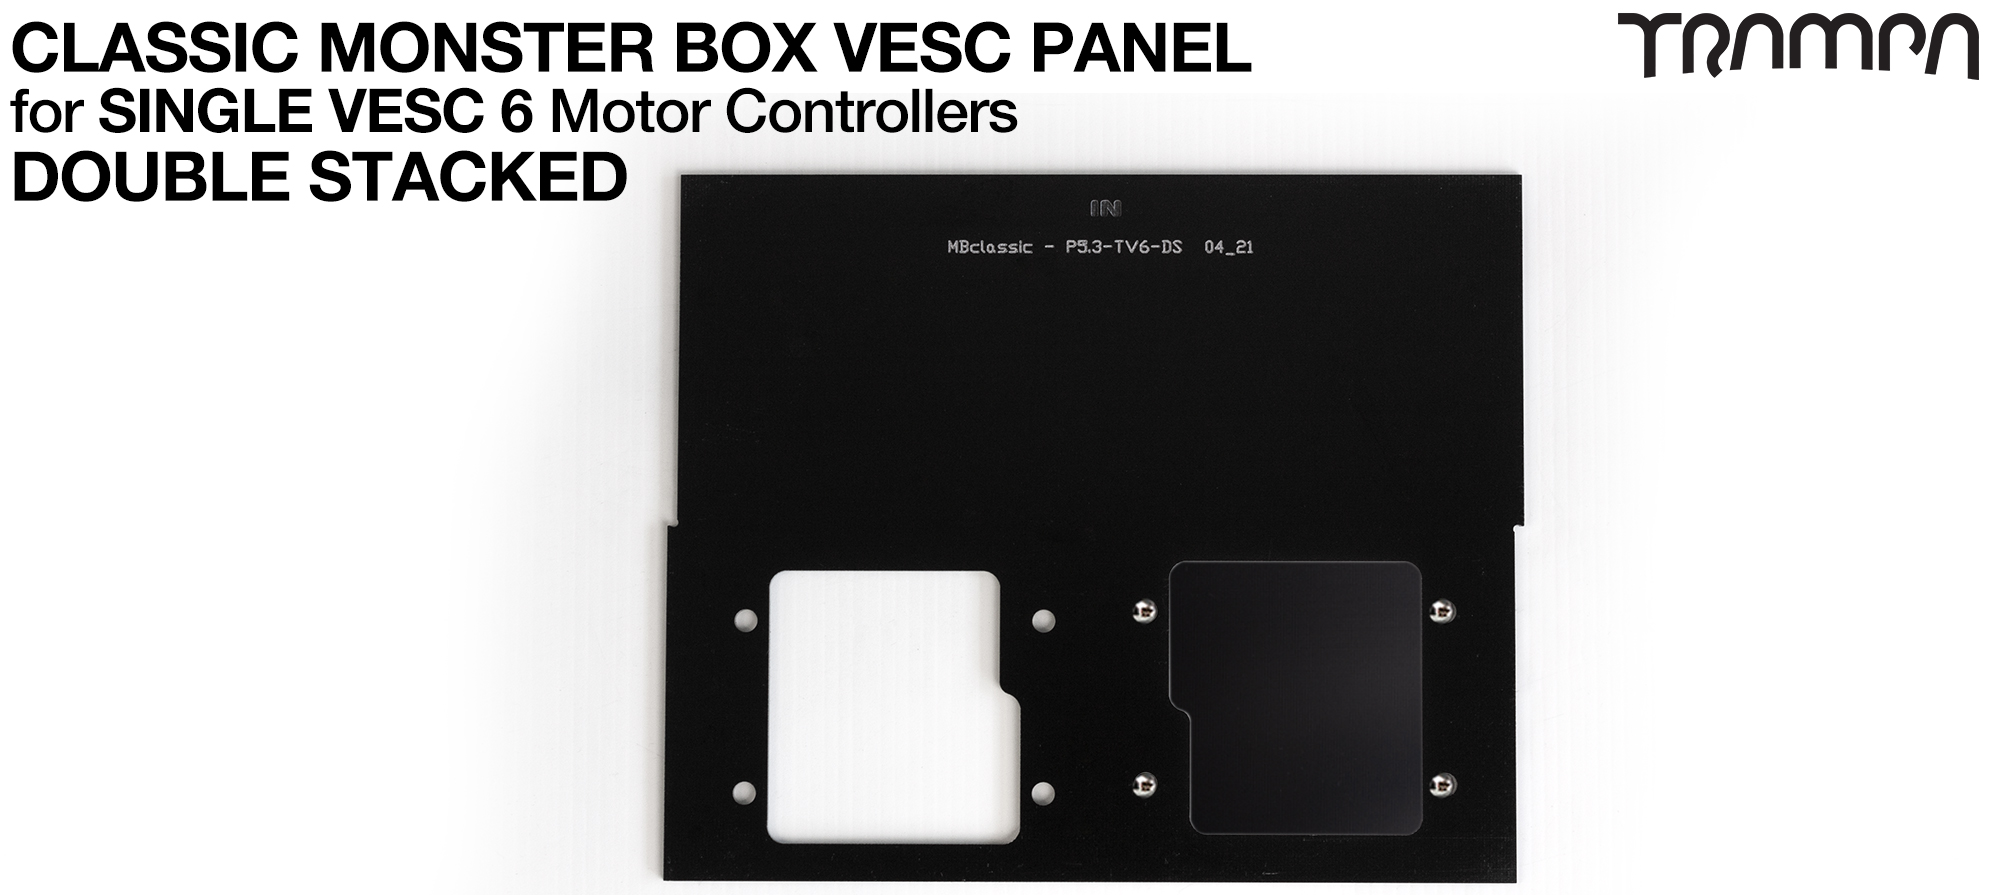 DOUBLE Stack CLASSIC Box - Panel to fit 1x VESC 6 